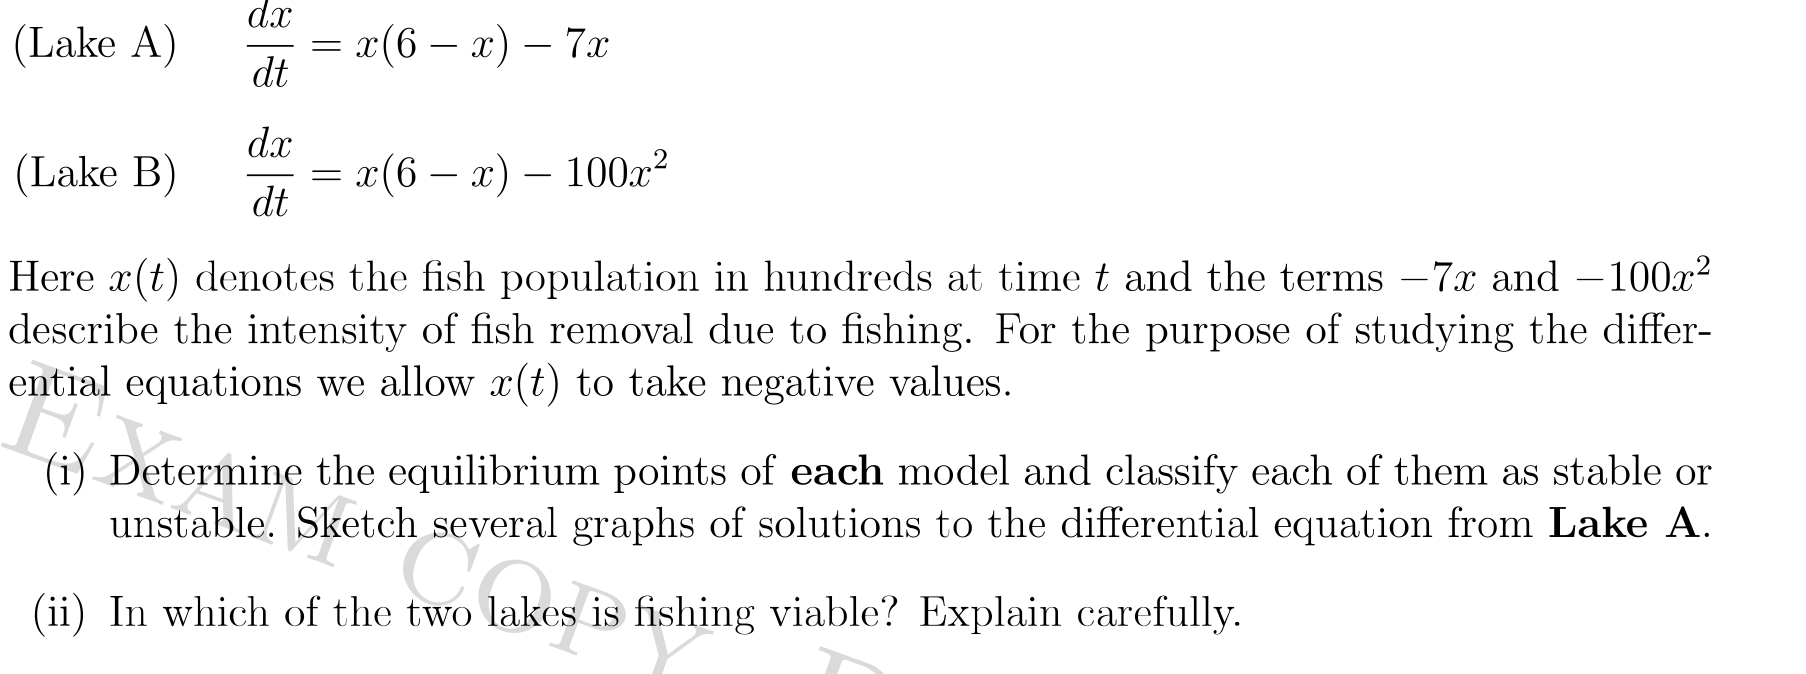 dx
(Lake A)
г(6 — а) — 7а
dt
dx
(Lake B)
x(6 – x) – 100x²
dt
Here x(t) denotes the fish population in hundreds at time t and the terms – 7.x and –100x?
describe the intensity of fish removal due to fishing. For the purpose of studying the differ-
ential equations we allow x(t) to take negative values.
(i) Determine the equilibrium points of each model and classify each of them as stable or
unstable. Sketch several graphs of solutions to the differential equation from Lake A.
(ii) In which of the two lakes is fishing viable? Explain carefully.
